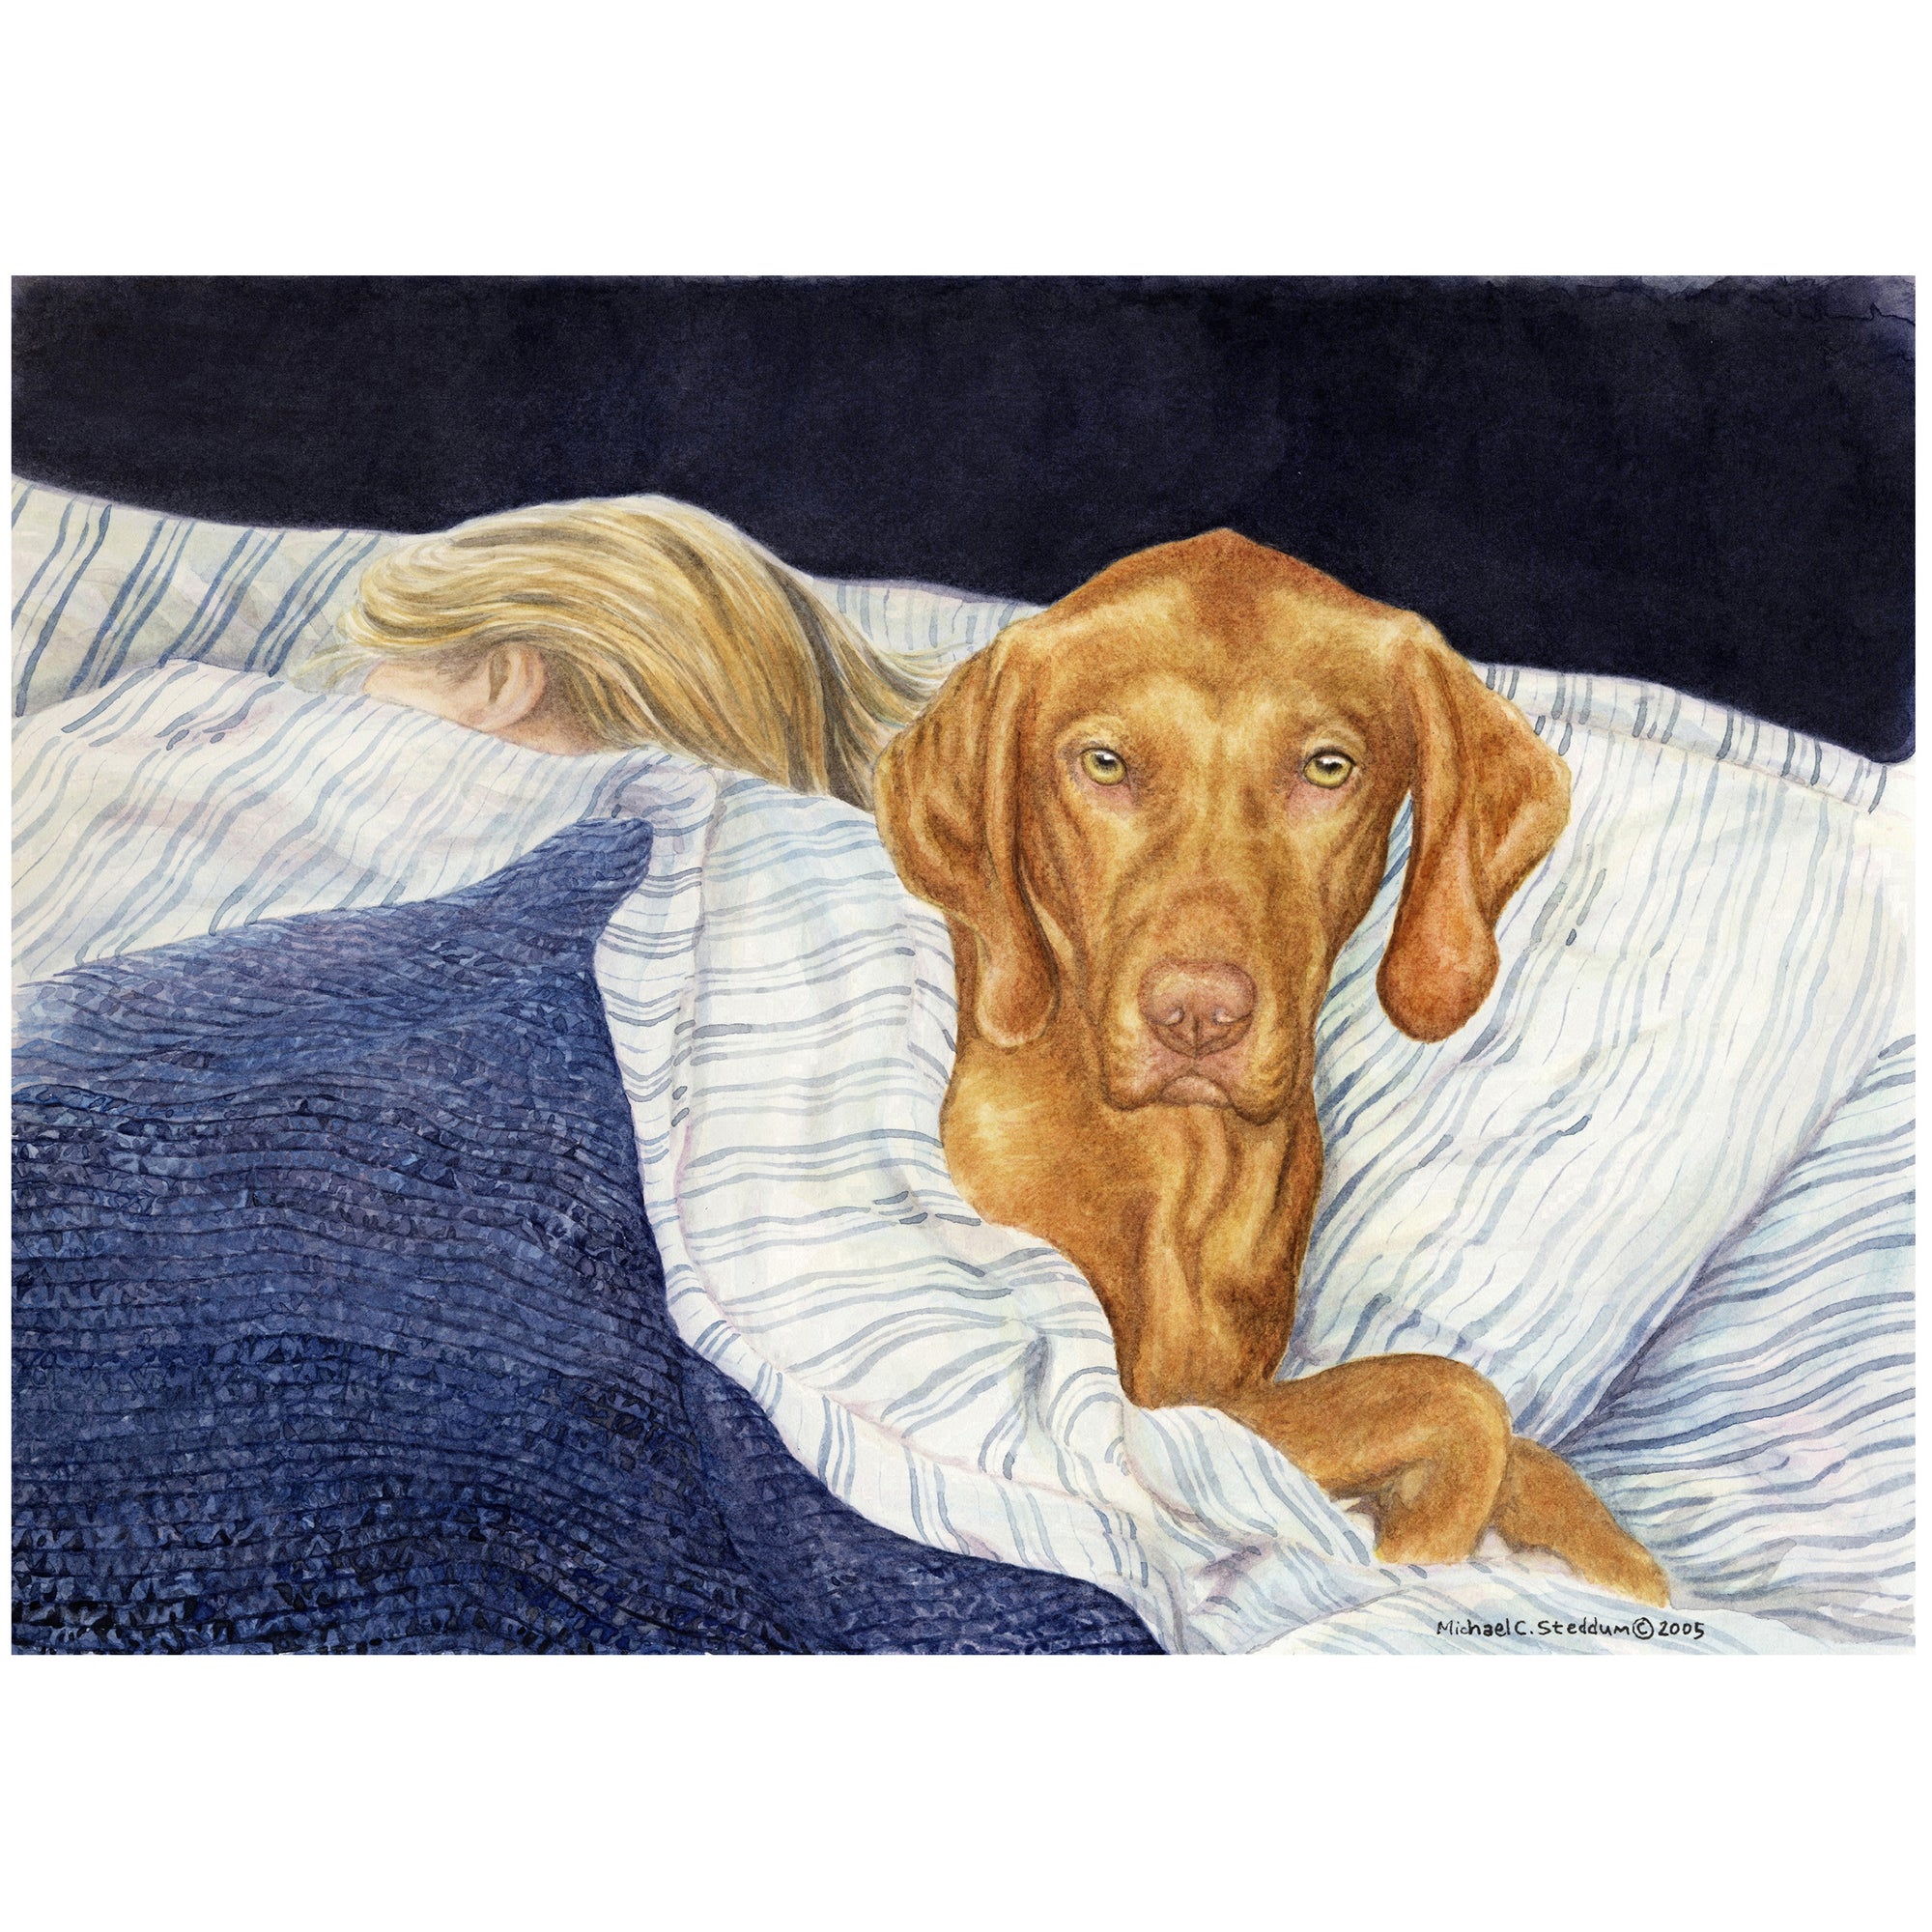 Vizsla Art Reproduction Print – Lucky Dog by Michael Steddum - Limited Edition Signed and Numbered Vizsla Art Print